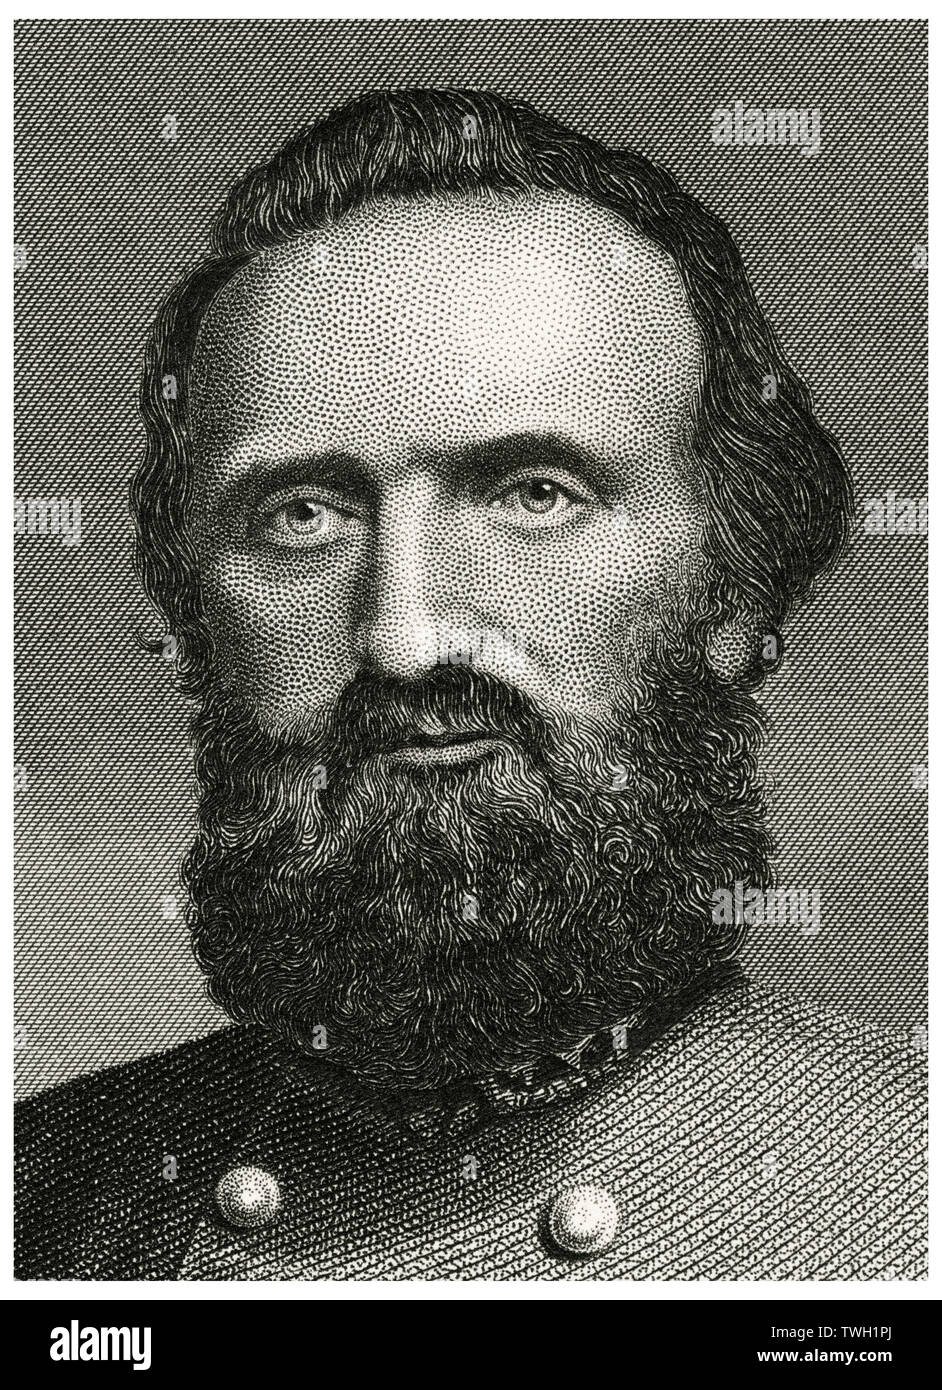 Thomas Jonathan 'Stonewall' Jackson (1824-63), Confederate General during American Civil War, Head and Shoulders Portrait, Steel Engraving, Portrait Gallery of Eminent Men and Women of Europe and America by Evert A. Duyckinck, Published by Henry J. Johnson, Johnson, Wilson & Company, New York, 1873 Stock Photo